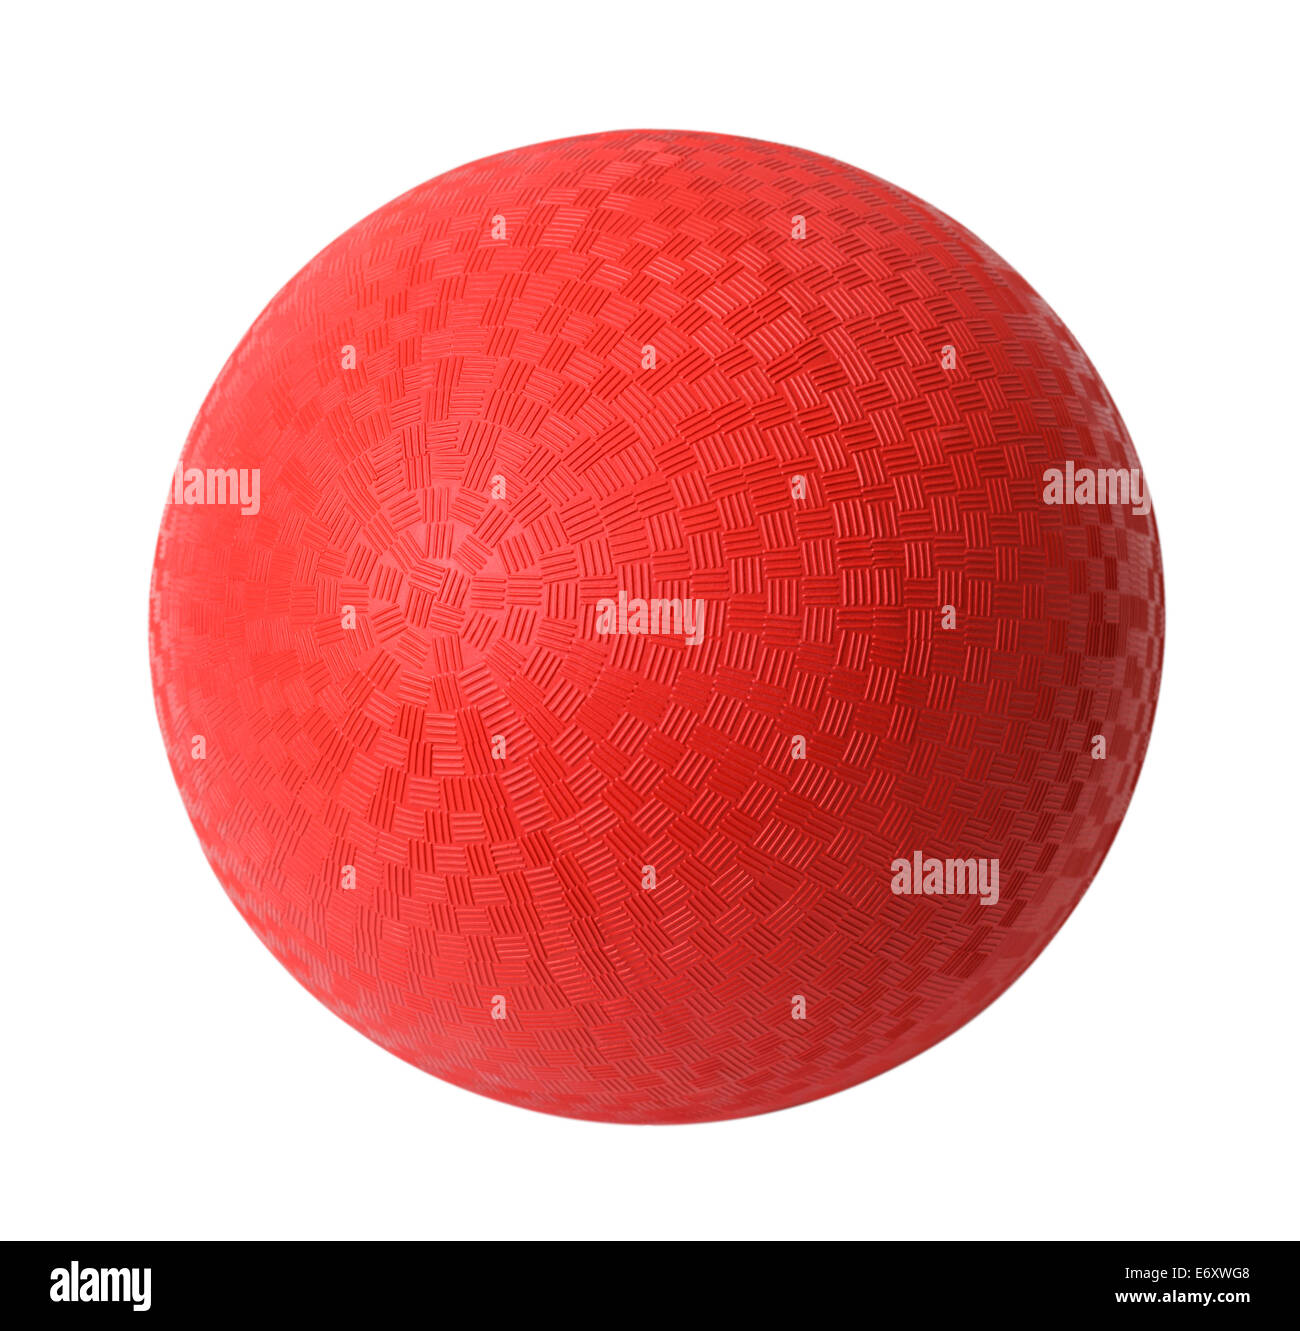 Red Rubber Ball Isolated on White Background. Stock Photo